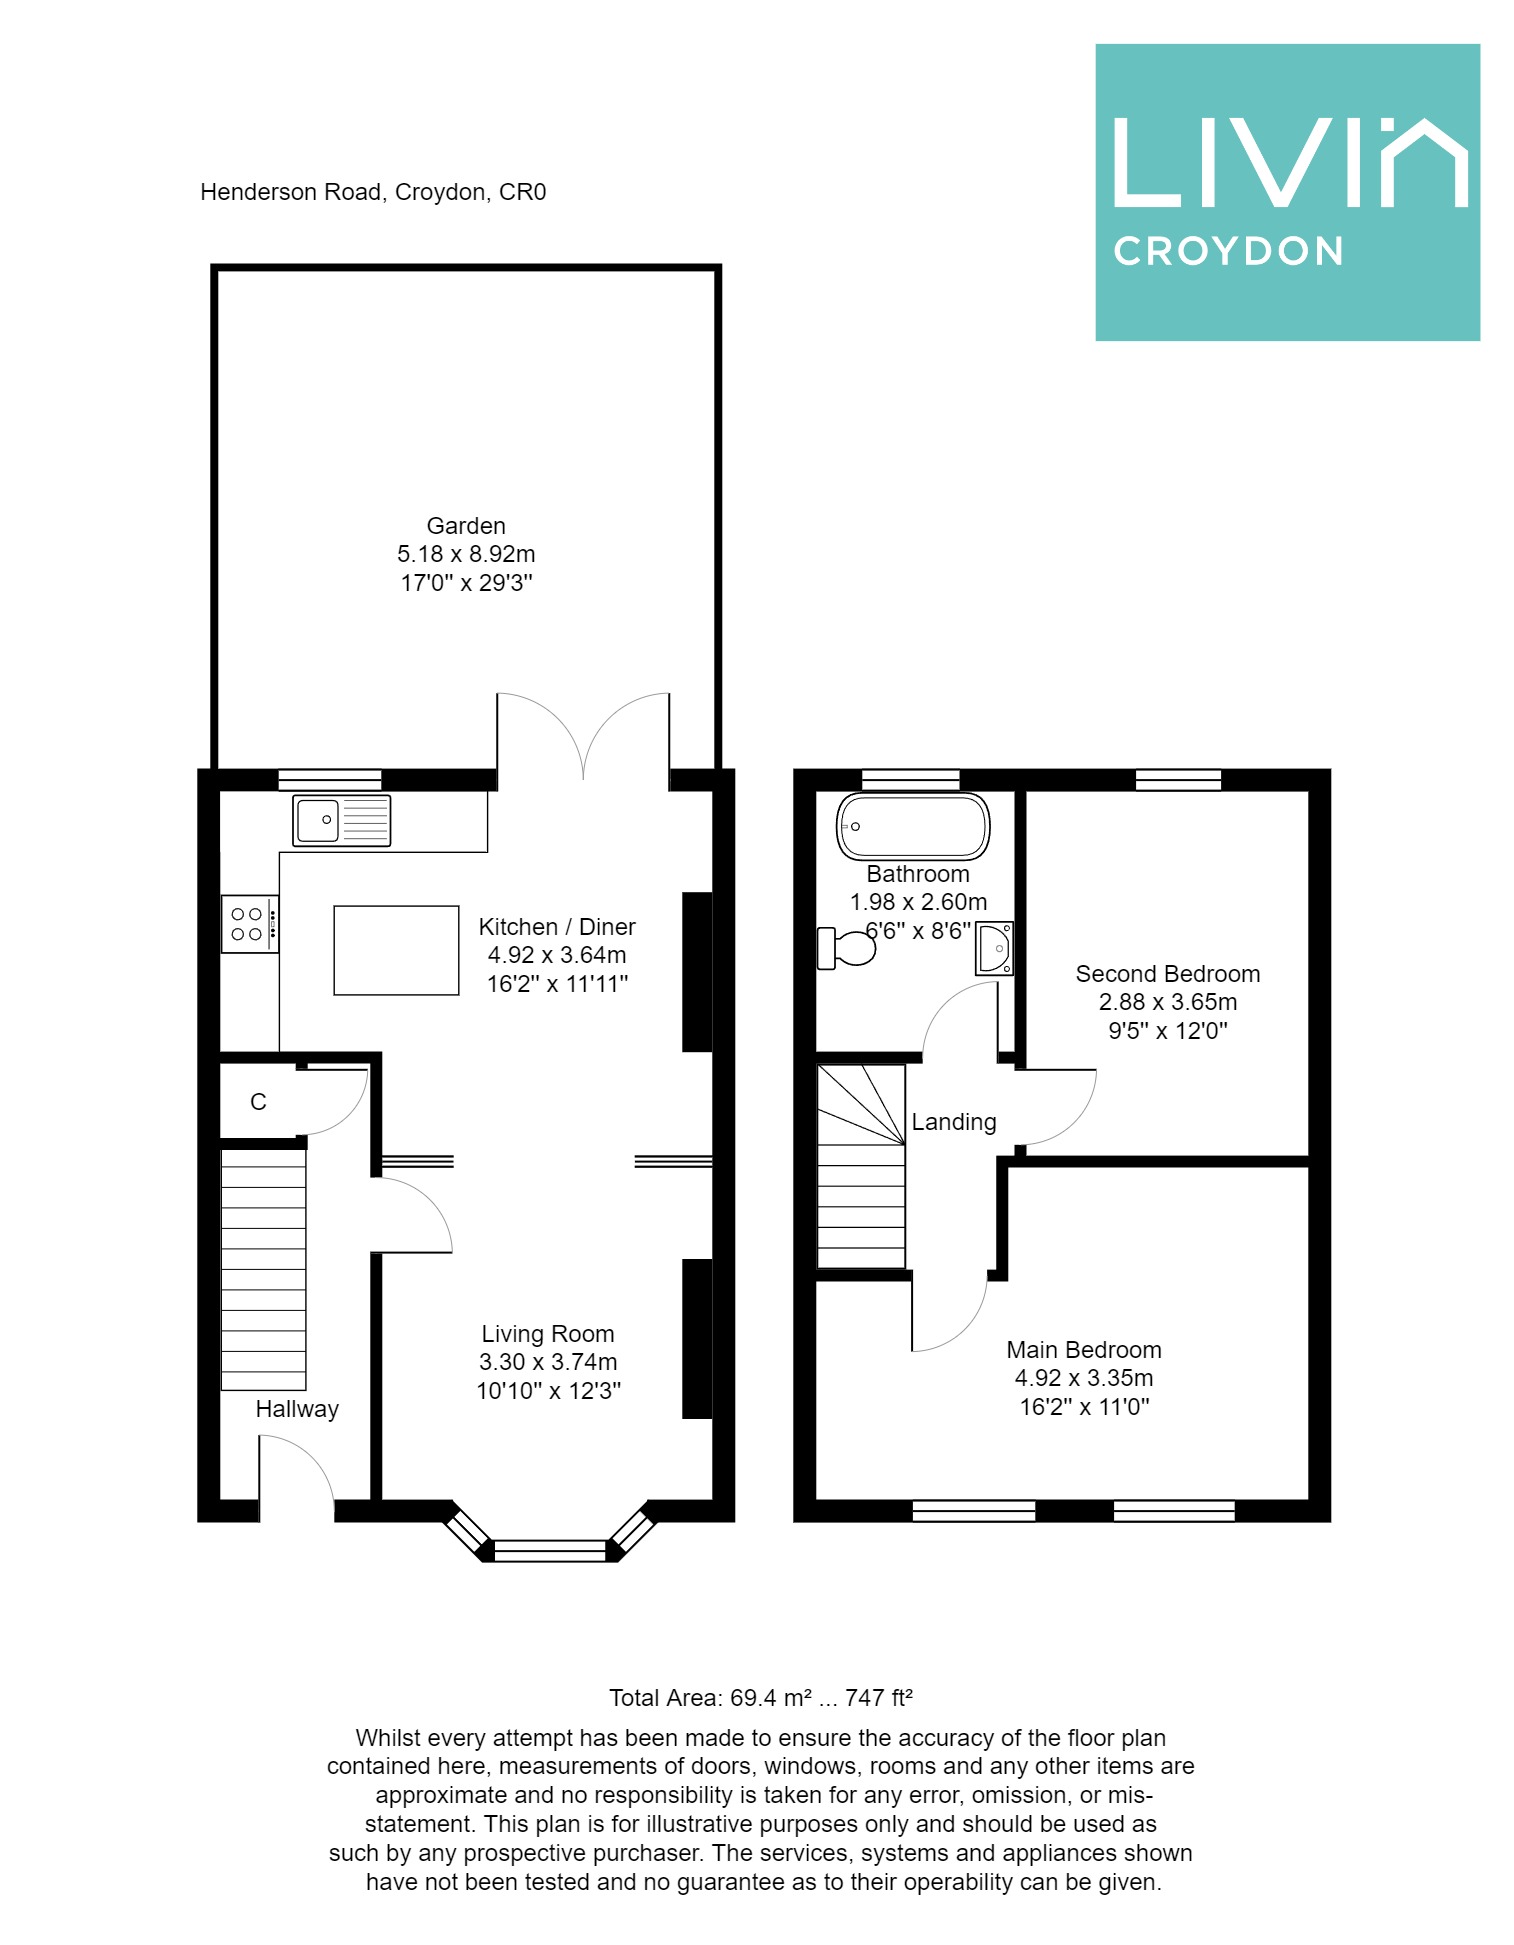 2 bed end of terrace house for sale in Henderson Road, Croydon - Property floorplan